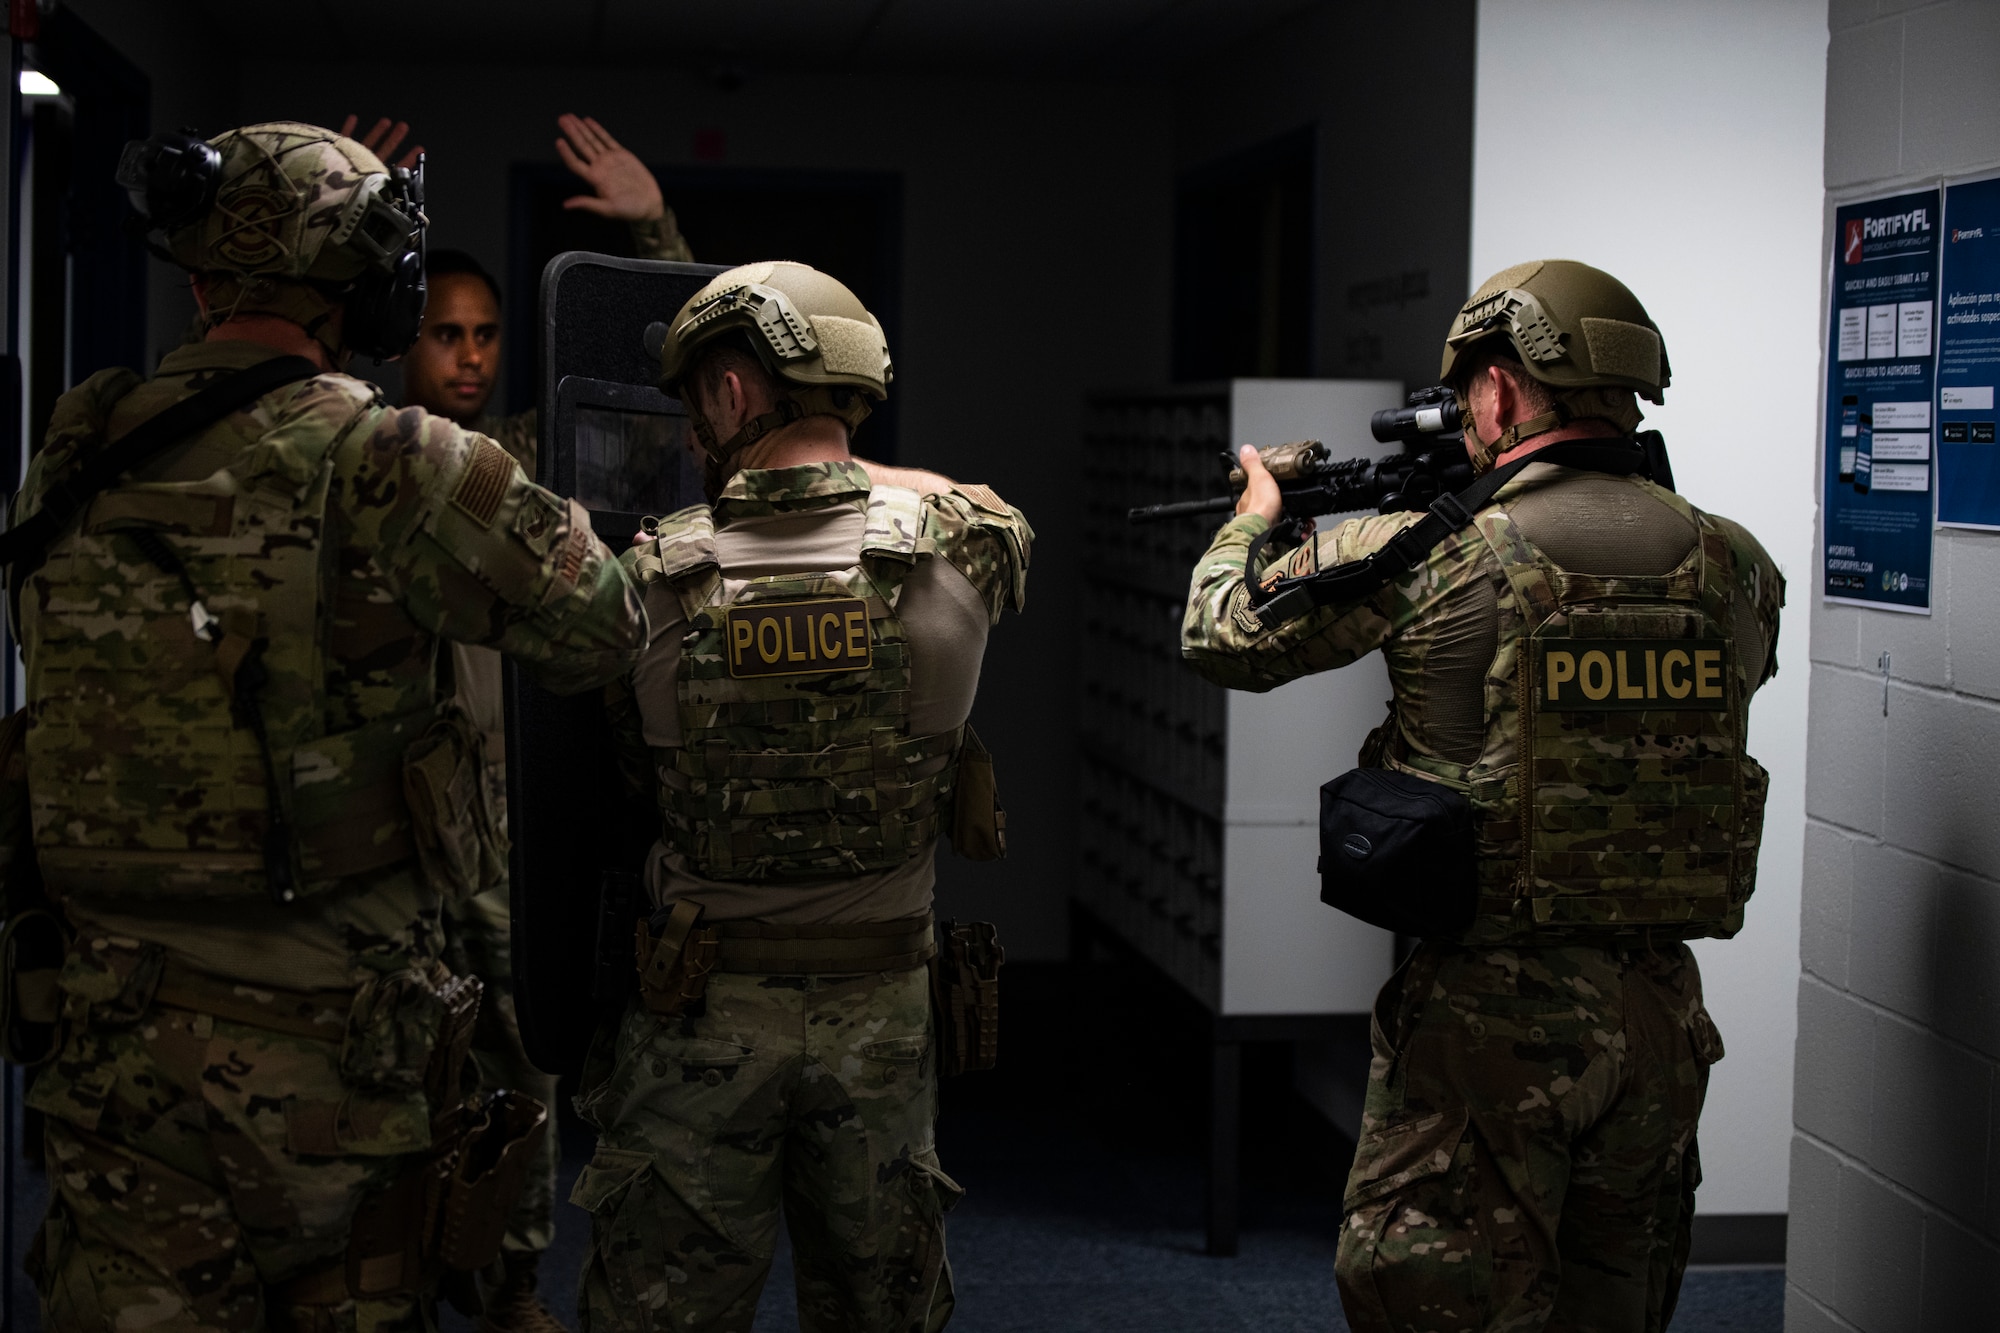 Members of the 325th Security Forces Squadron tactical response team move in to detain a simulated suspect during a training exercise in Panama City, Florida, July 13, 2021. The 325th SFS TRT trained to specialize in high-risk scenarios, including active shooters, barricaded suspects and hostage situations. (U.S. Air Force photo by Staff Sgt. Stefan Alvarez)